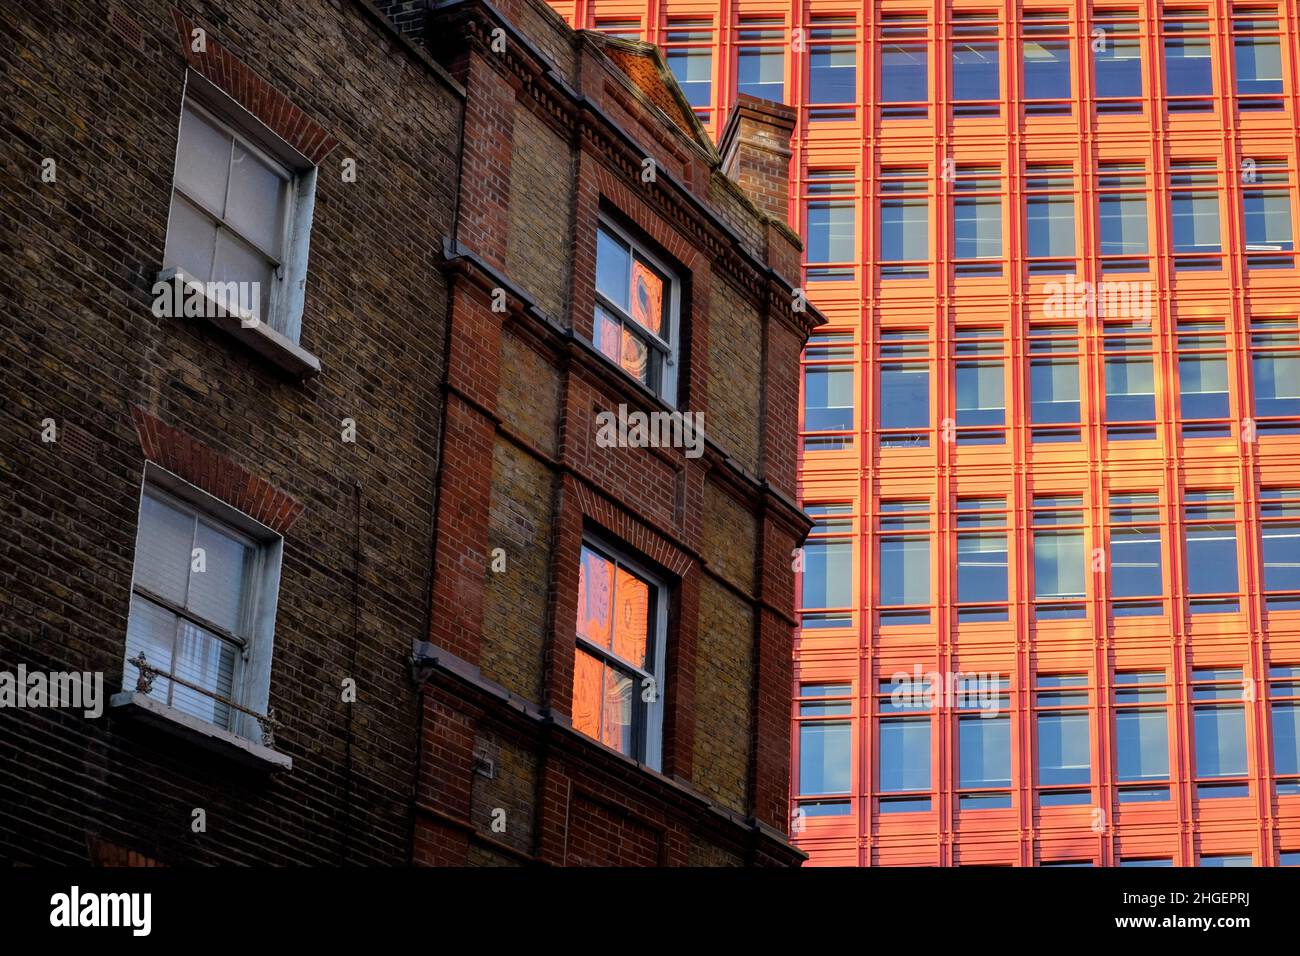 Juxtaposition of Victorian and modern buildings, central London, UK. Stock Photo